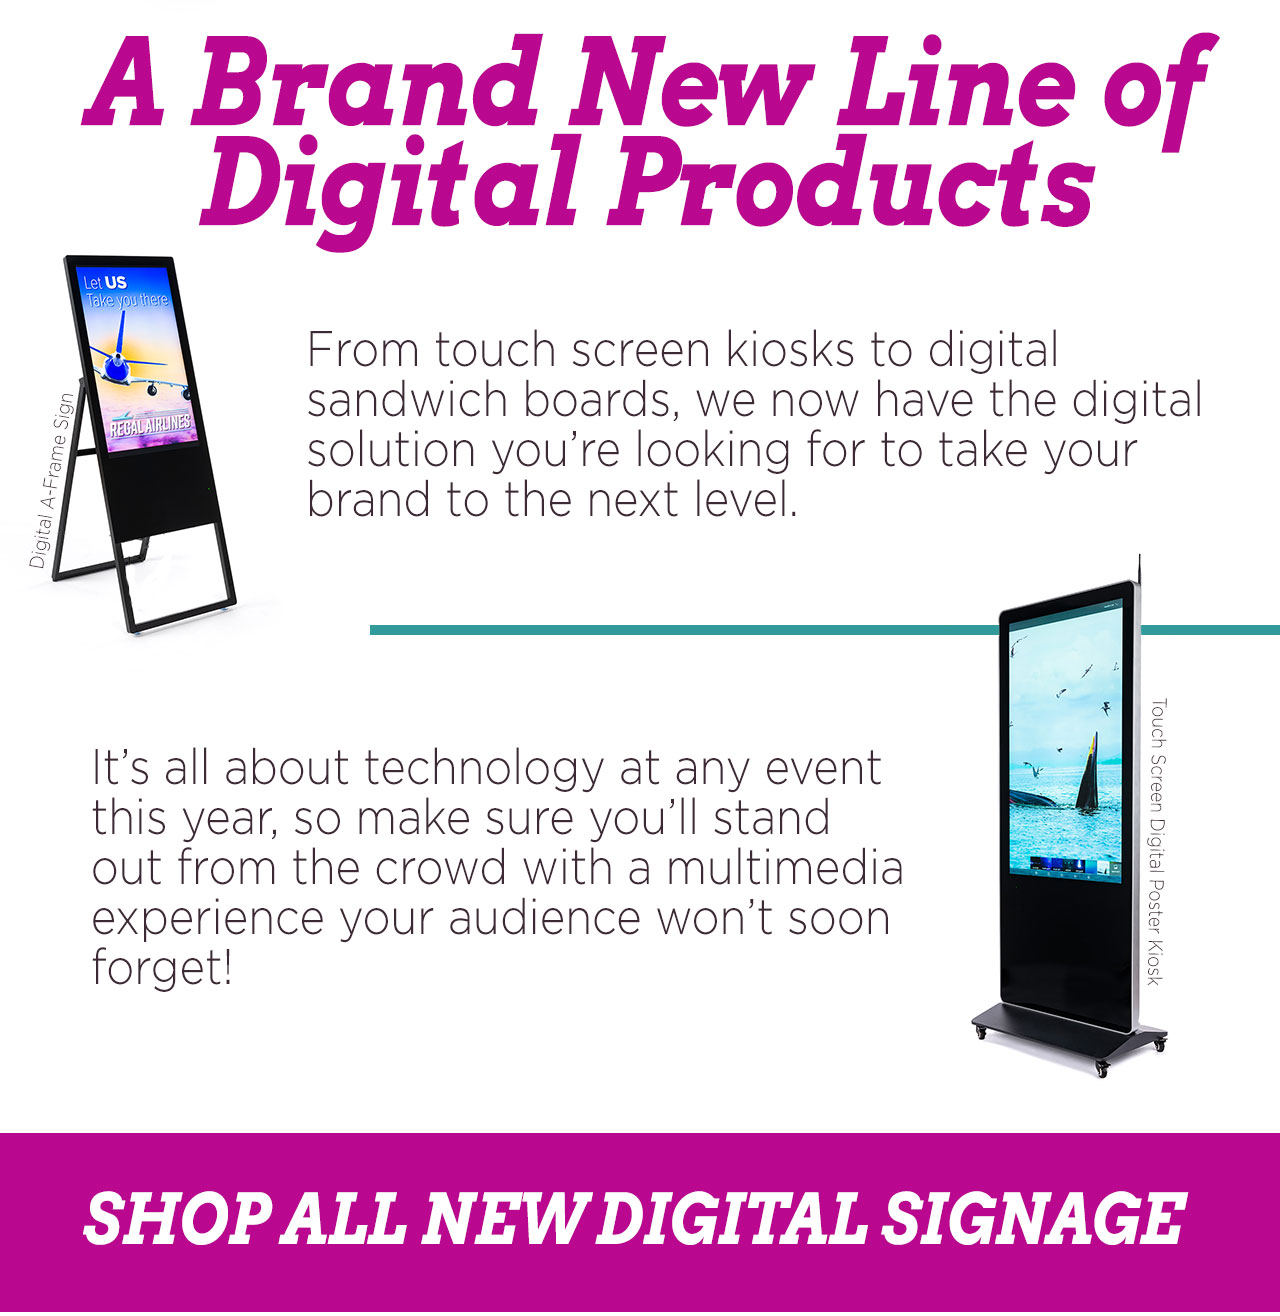 A Brand New Line of Digital Products